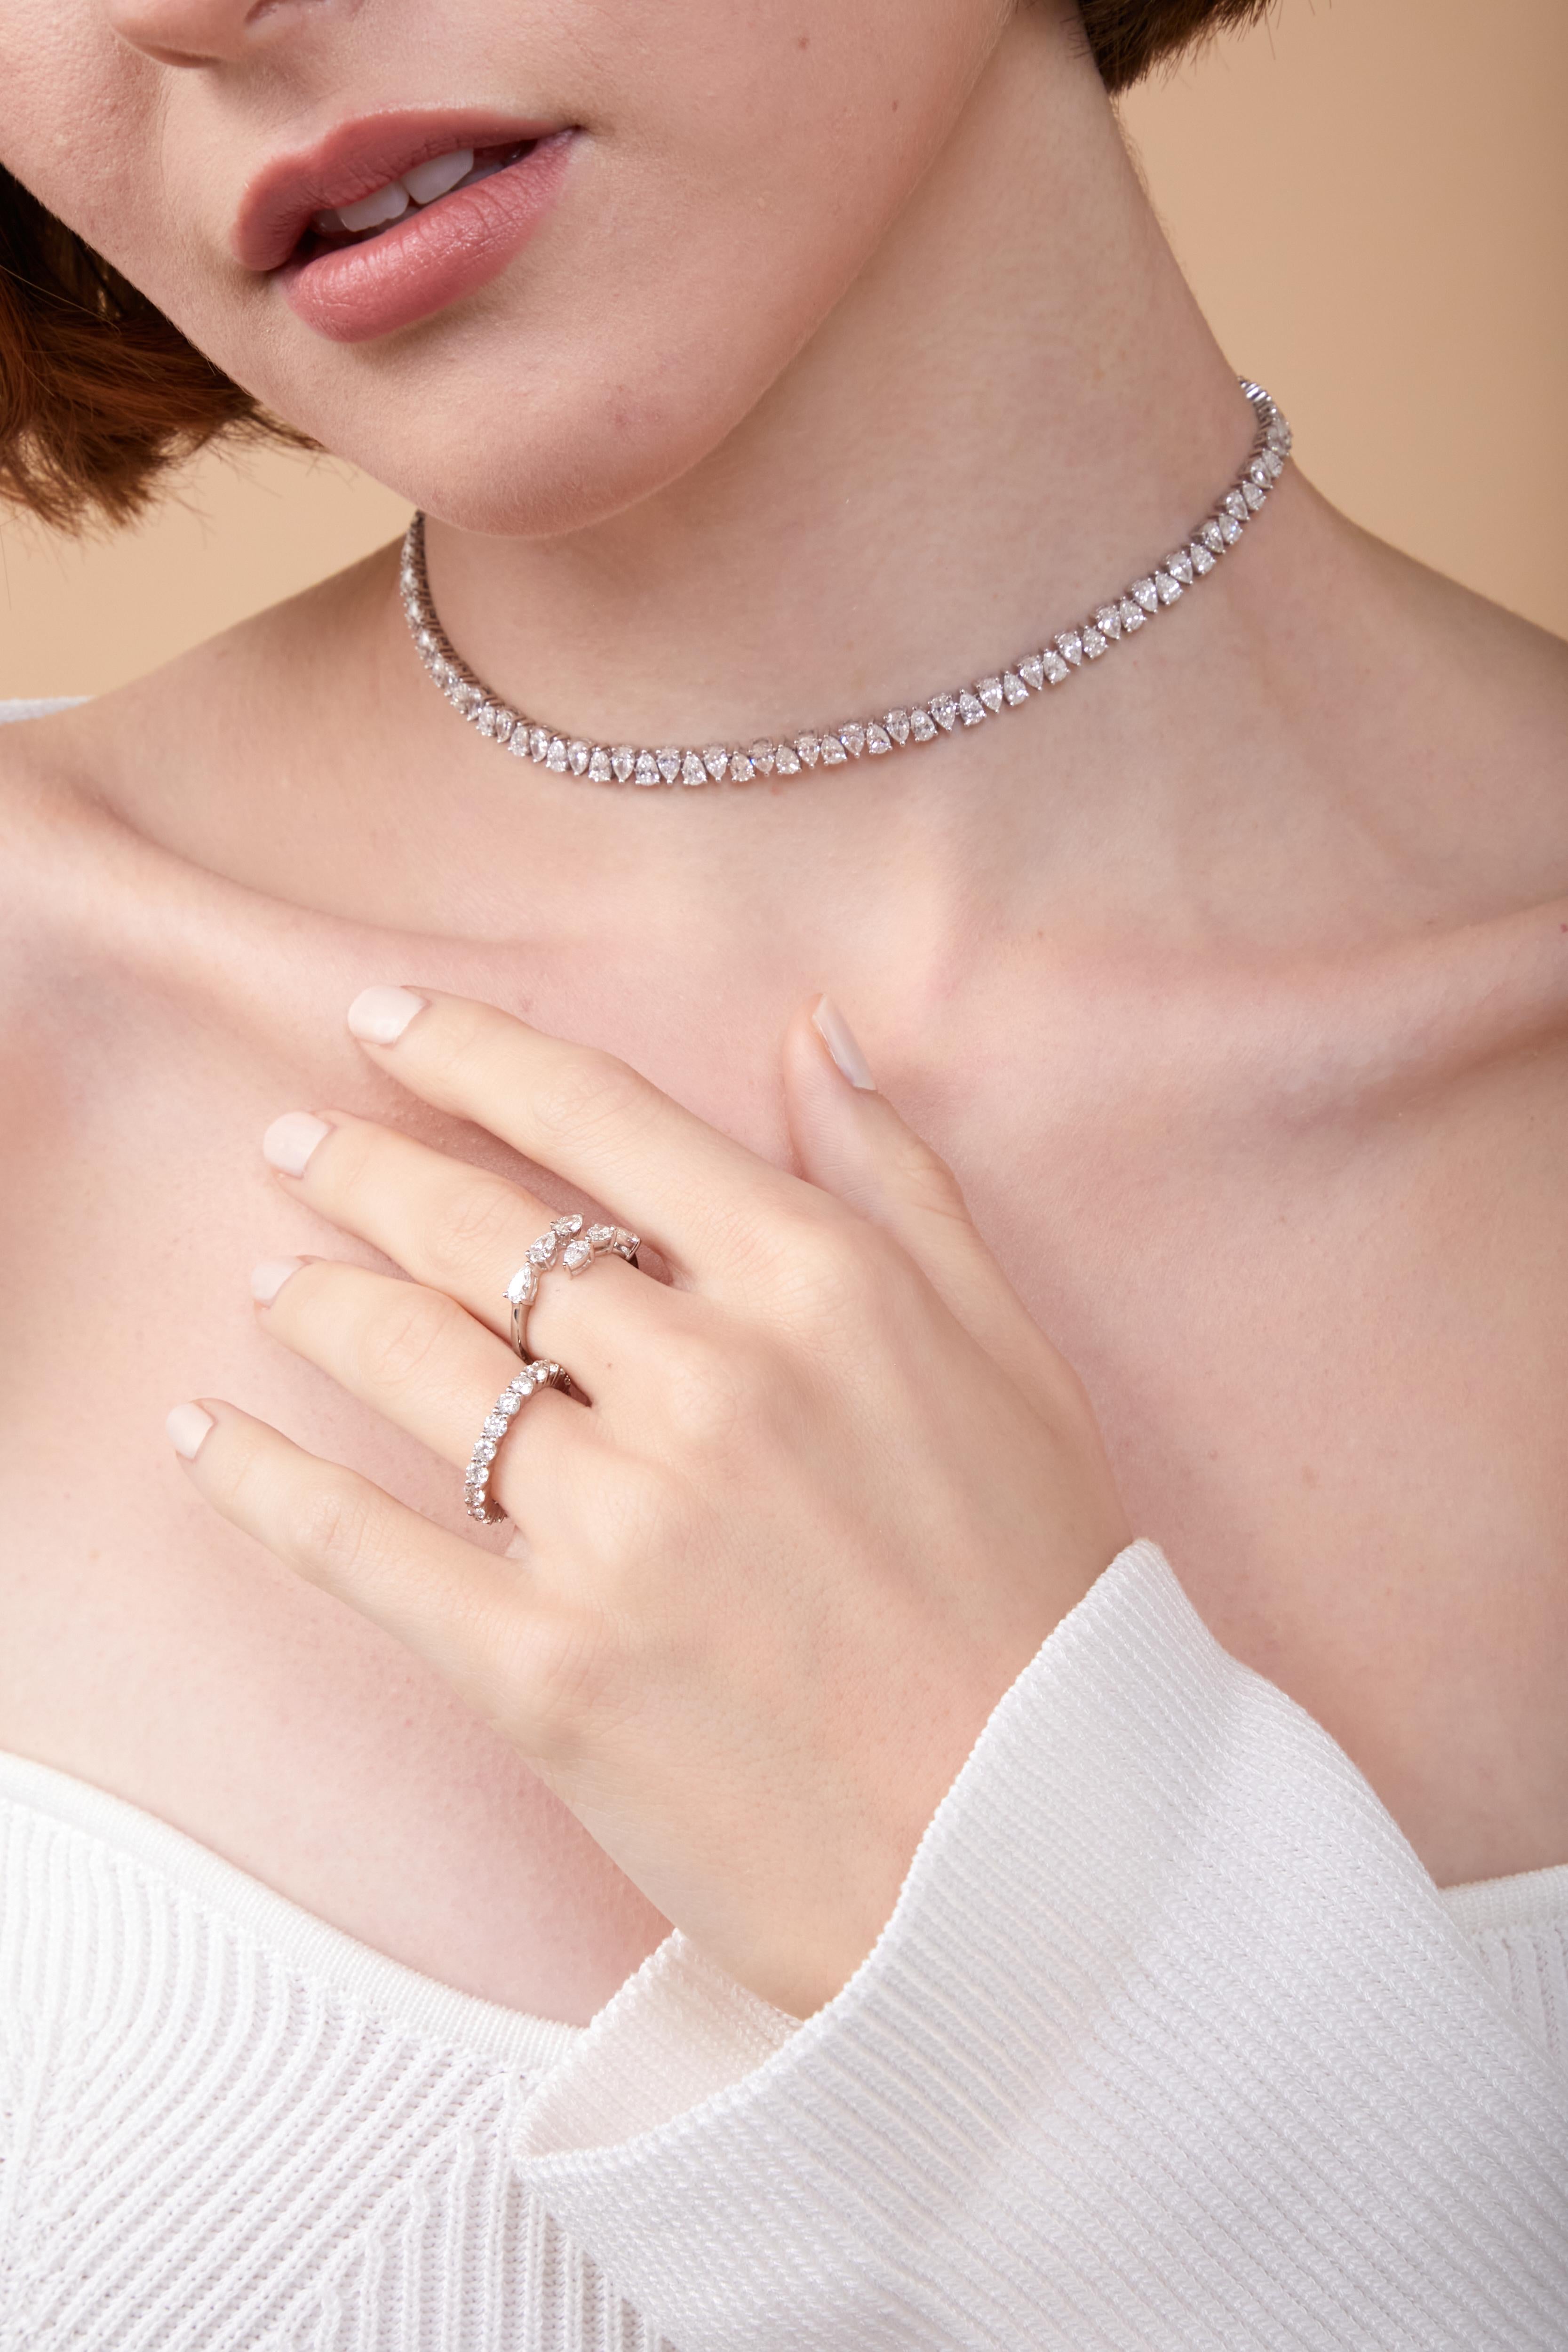 Featuring dainty multi-shaped diamonds, this collection showcases elegant pieces that are extremely versatile and a timeless addition to your jewelry collection.
At Tanisa Jewelry only use high quality (G color, VS clarity) natural diamonds in our